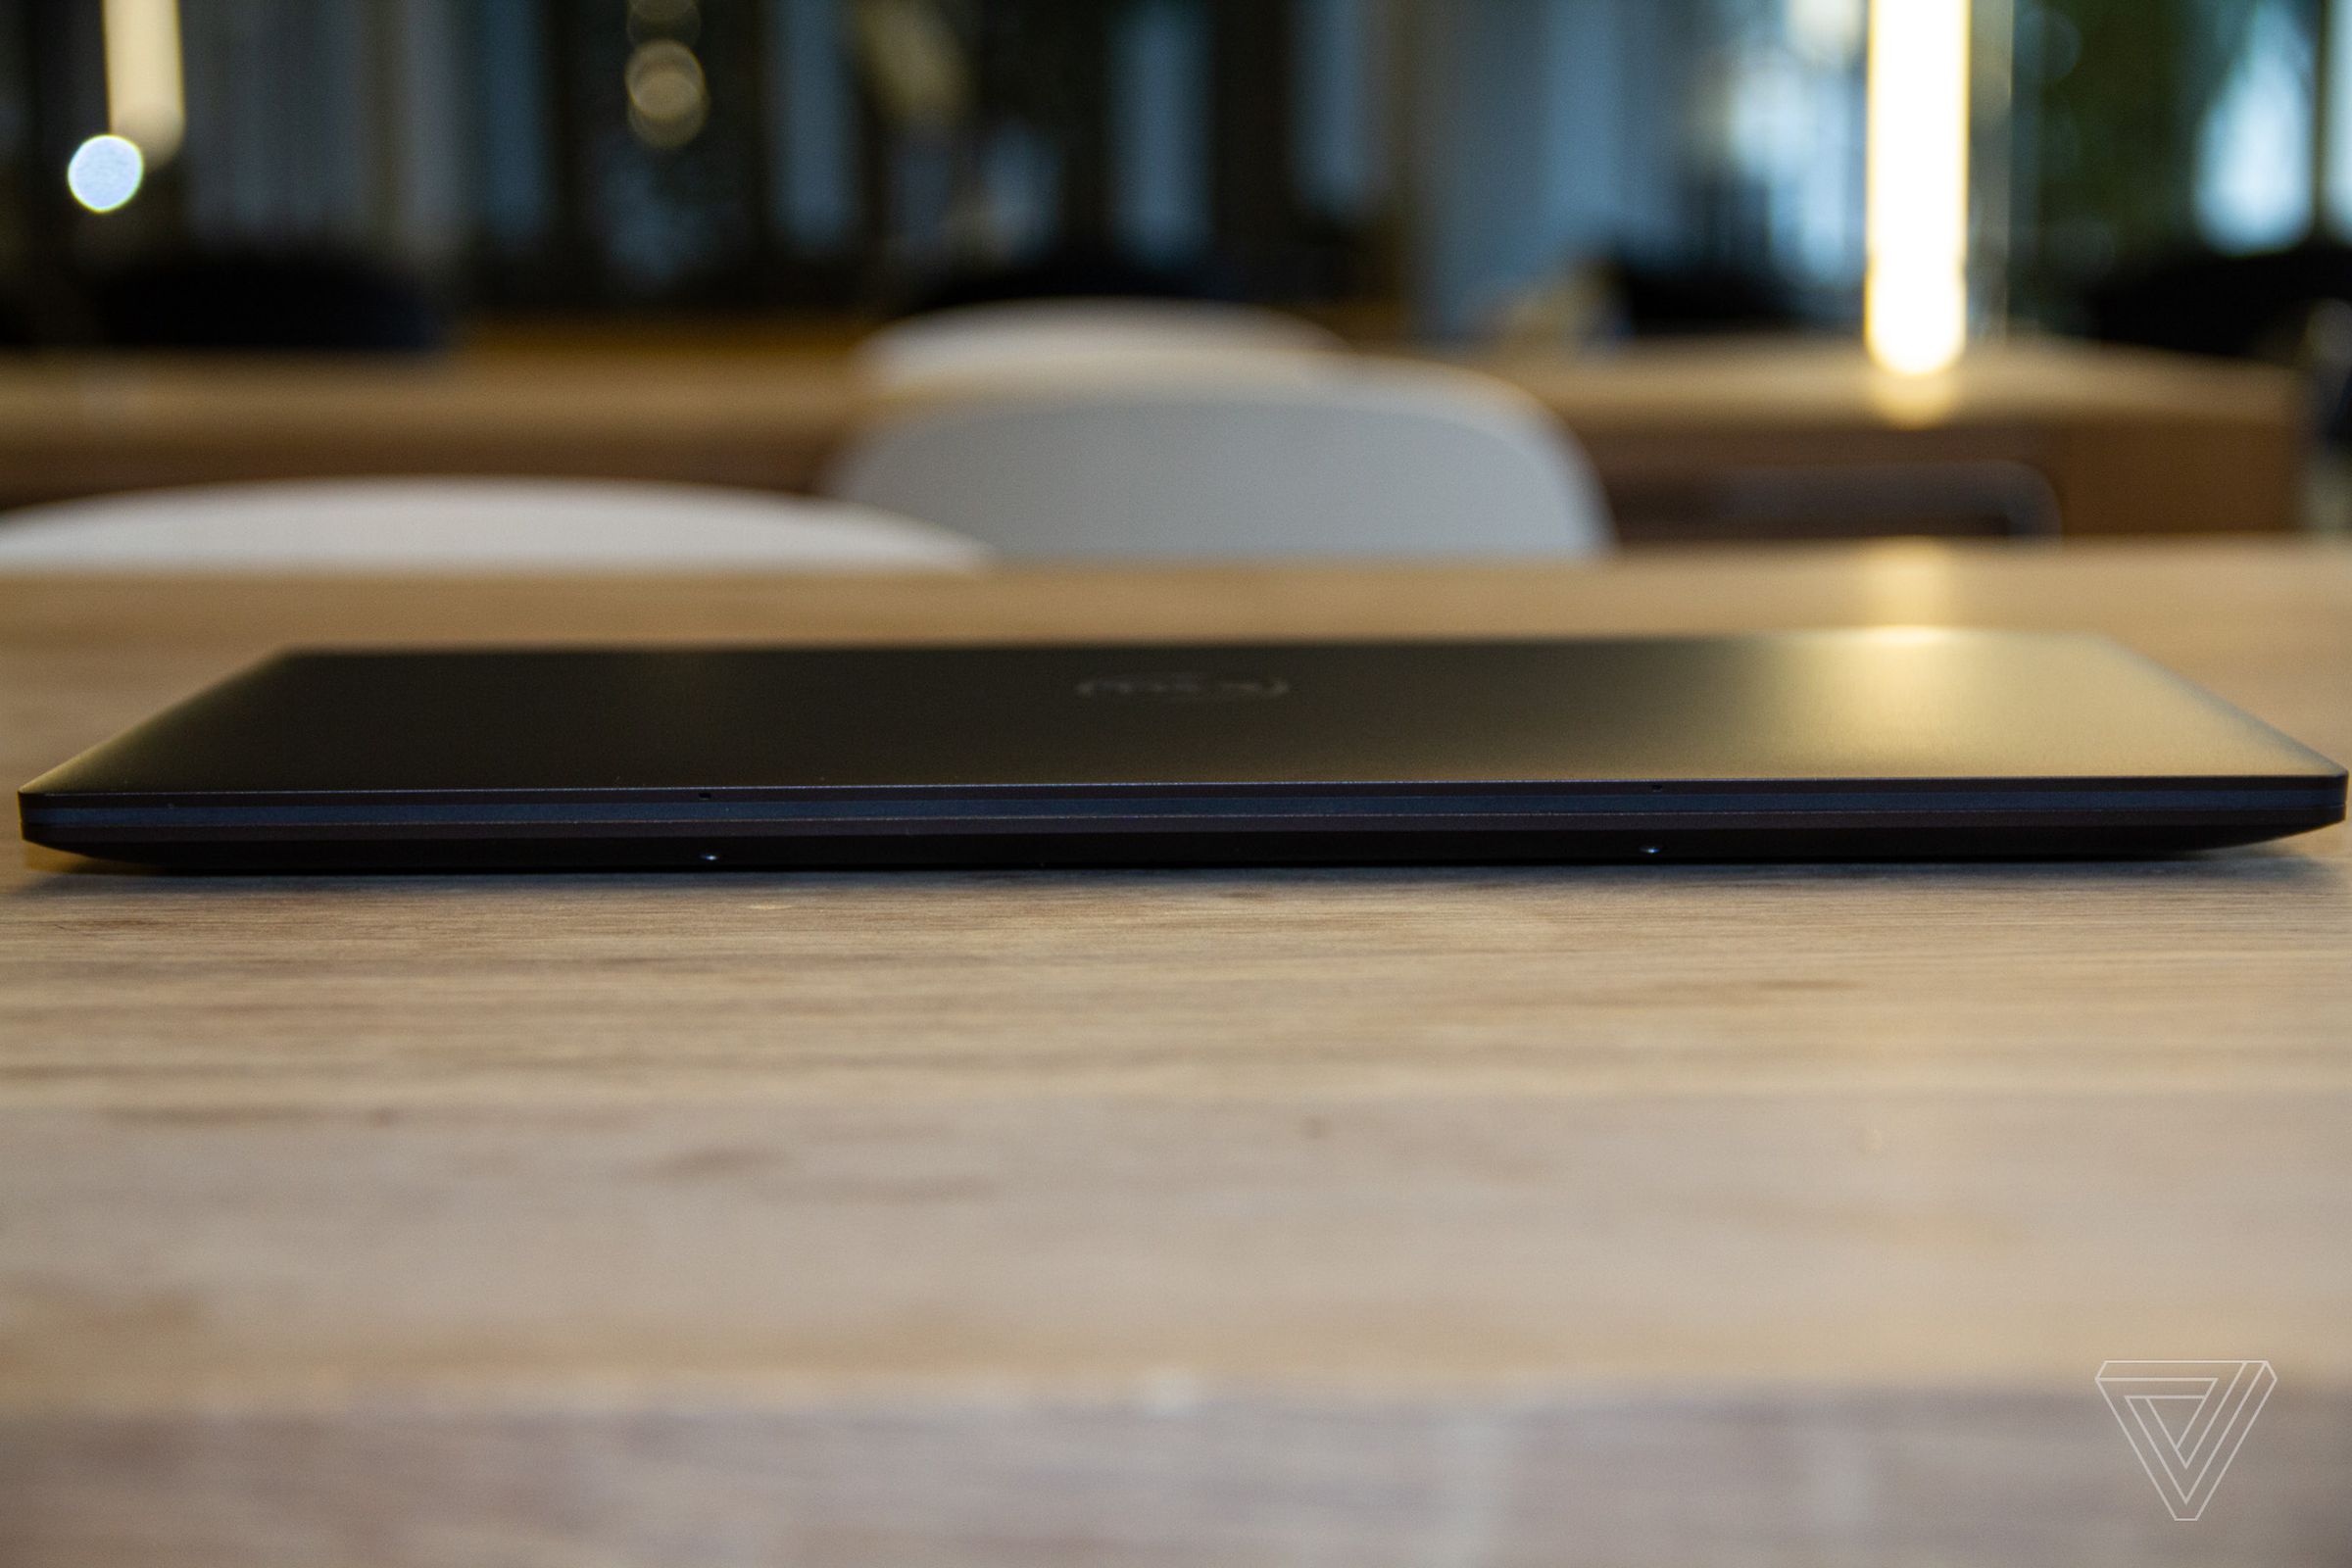 The Dell XPS 13 Plus closed on a wooden table seen from the front.